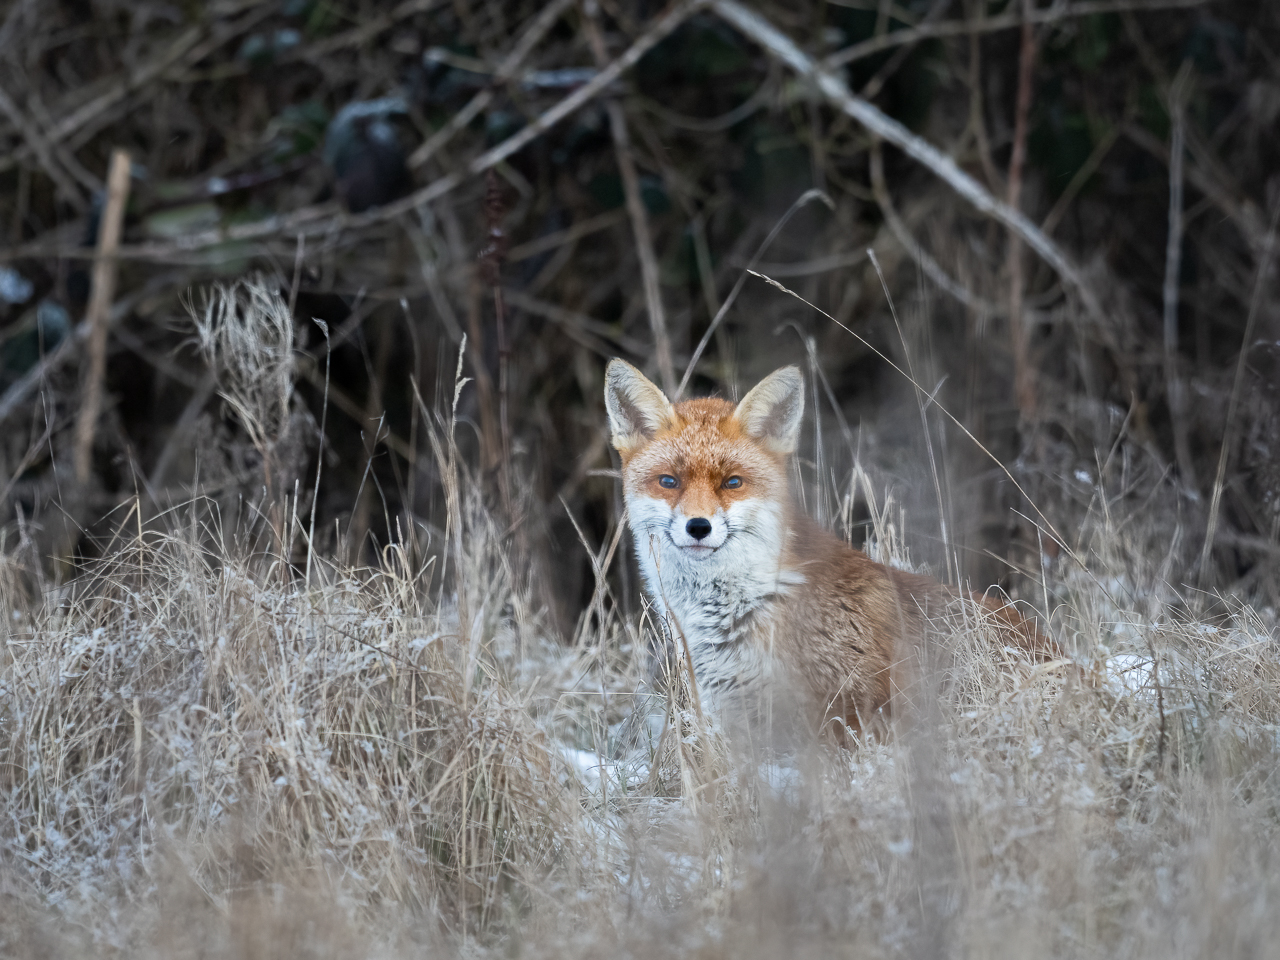 A red fox (Vulpes vuples) in a frosty field in the Beddington Farmlands nature reserve in Sutton, London.